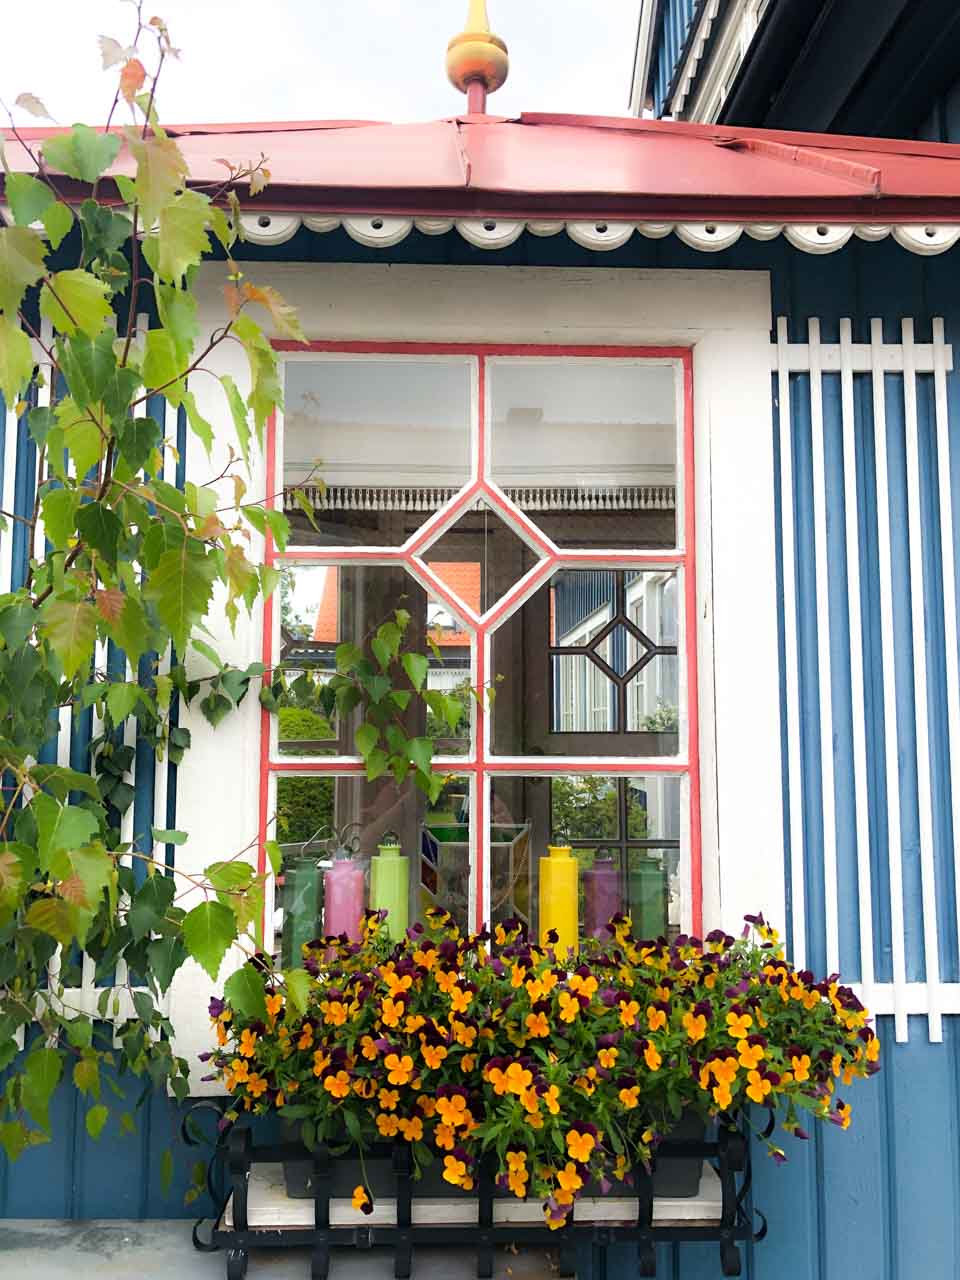 A close-up shot of plants under the window of a traditional Scandinavian house in Karlskrona, Sweden